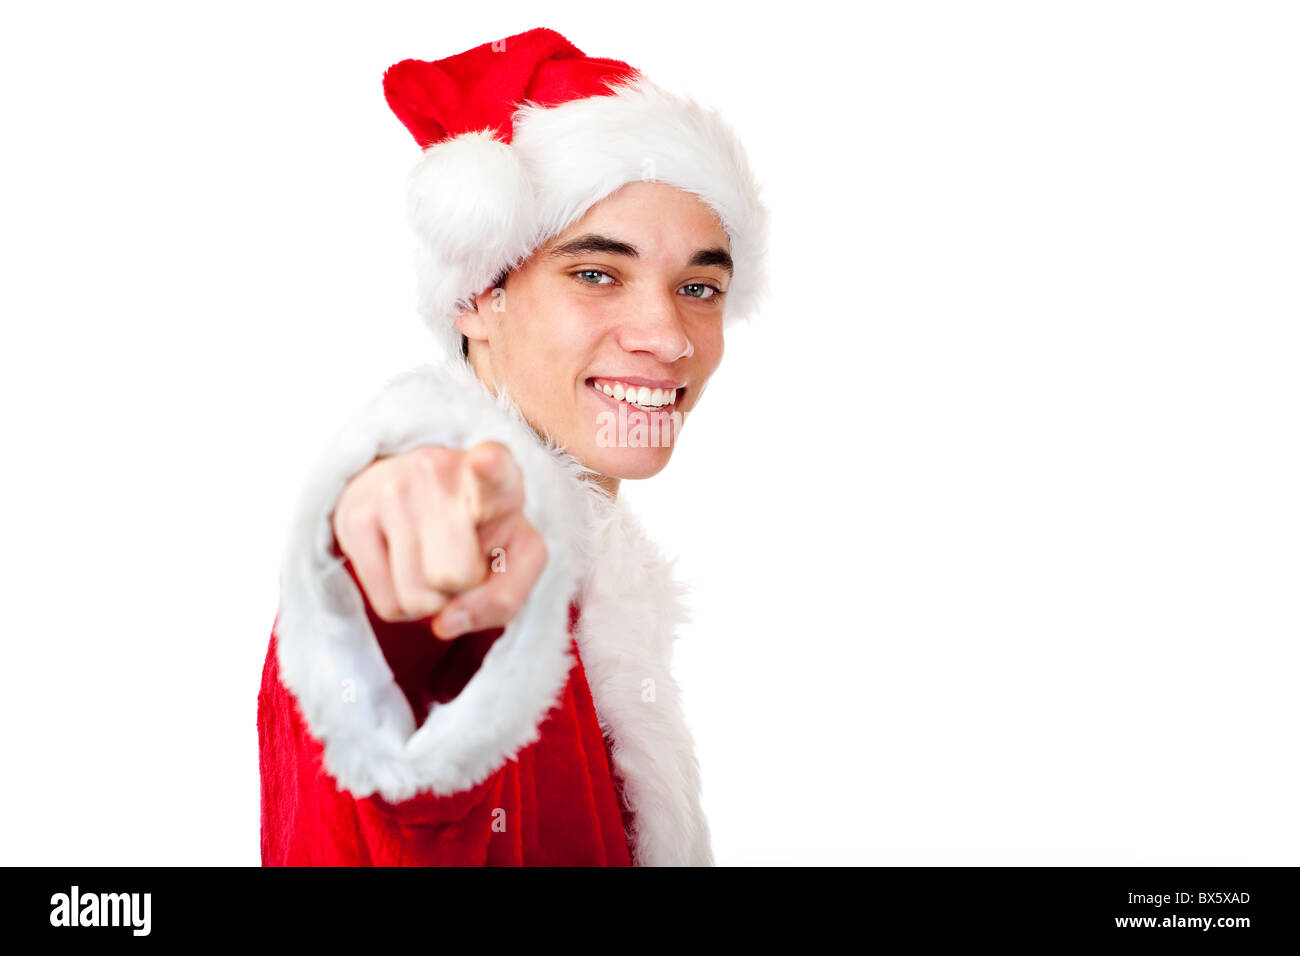 Smiling male Santa Claus teenager pointing at camera. Isolated on white background. Stock Photo